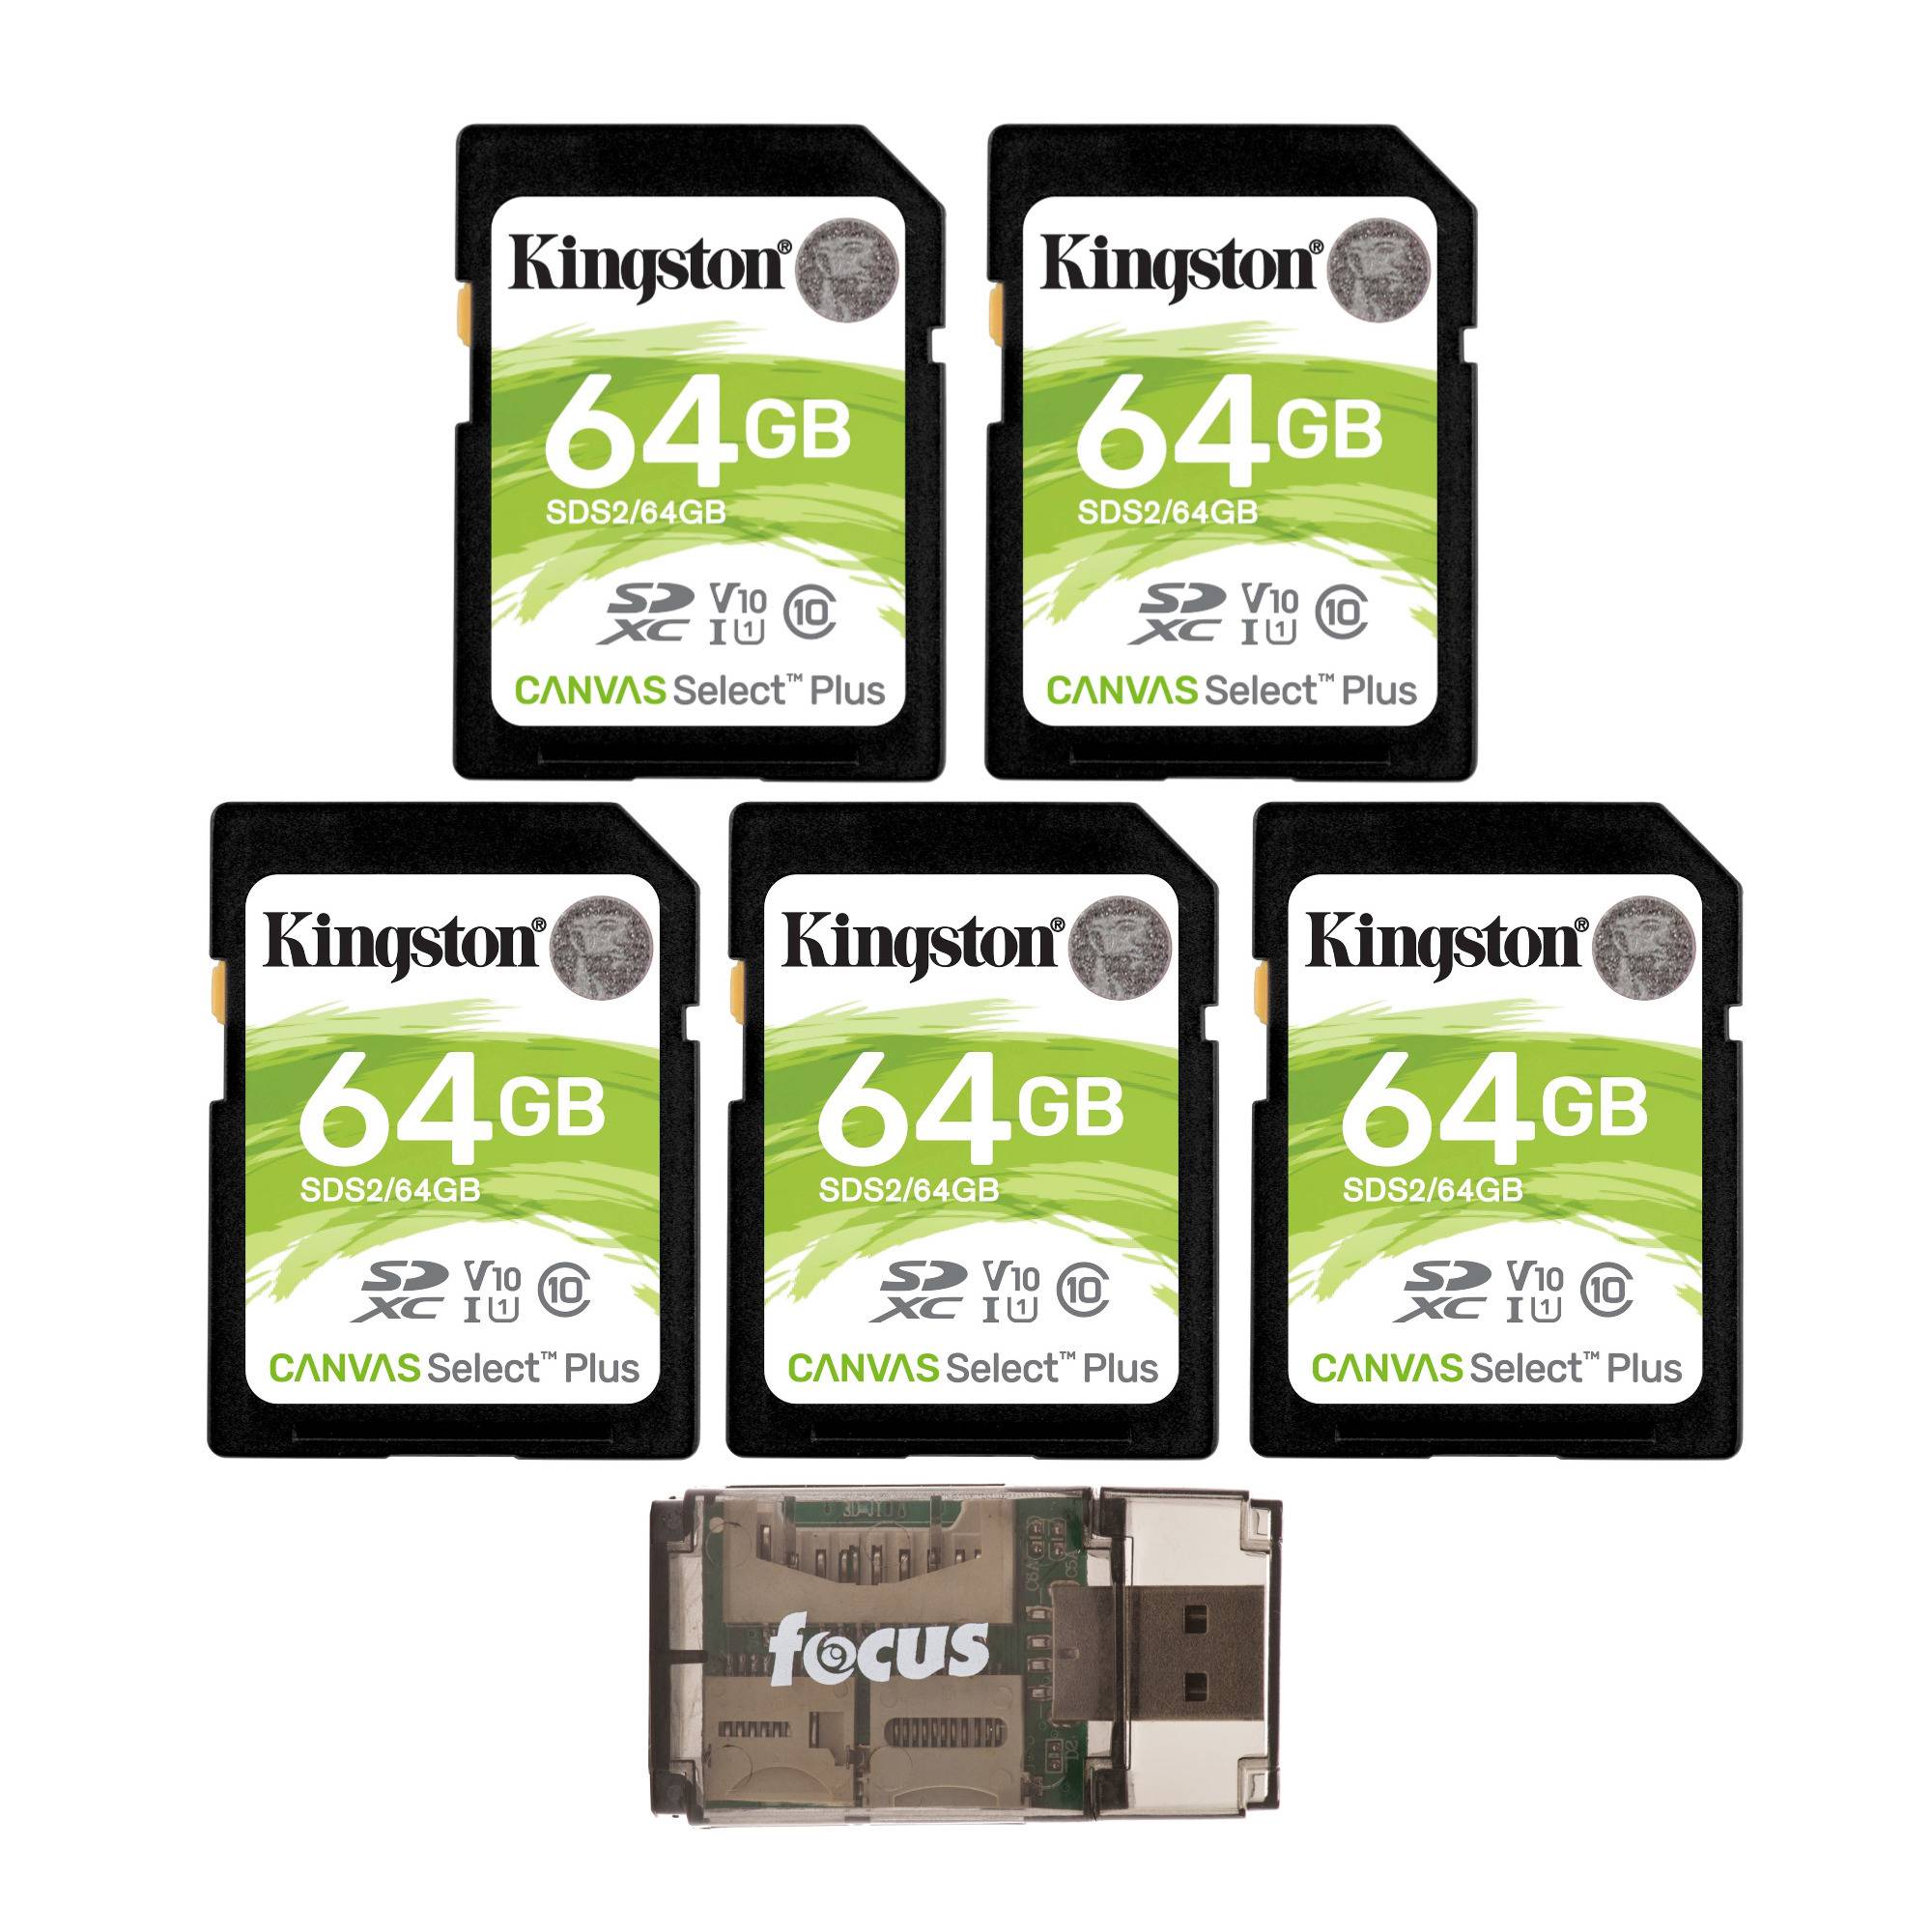 Kingston 64GB SDHC Canvas Select Plus Memory Card (5-Pack) with Focus High Speed Card Reader